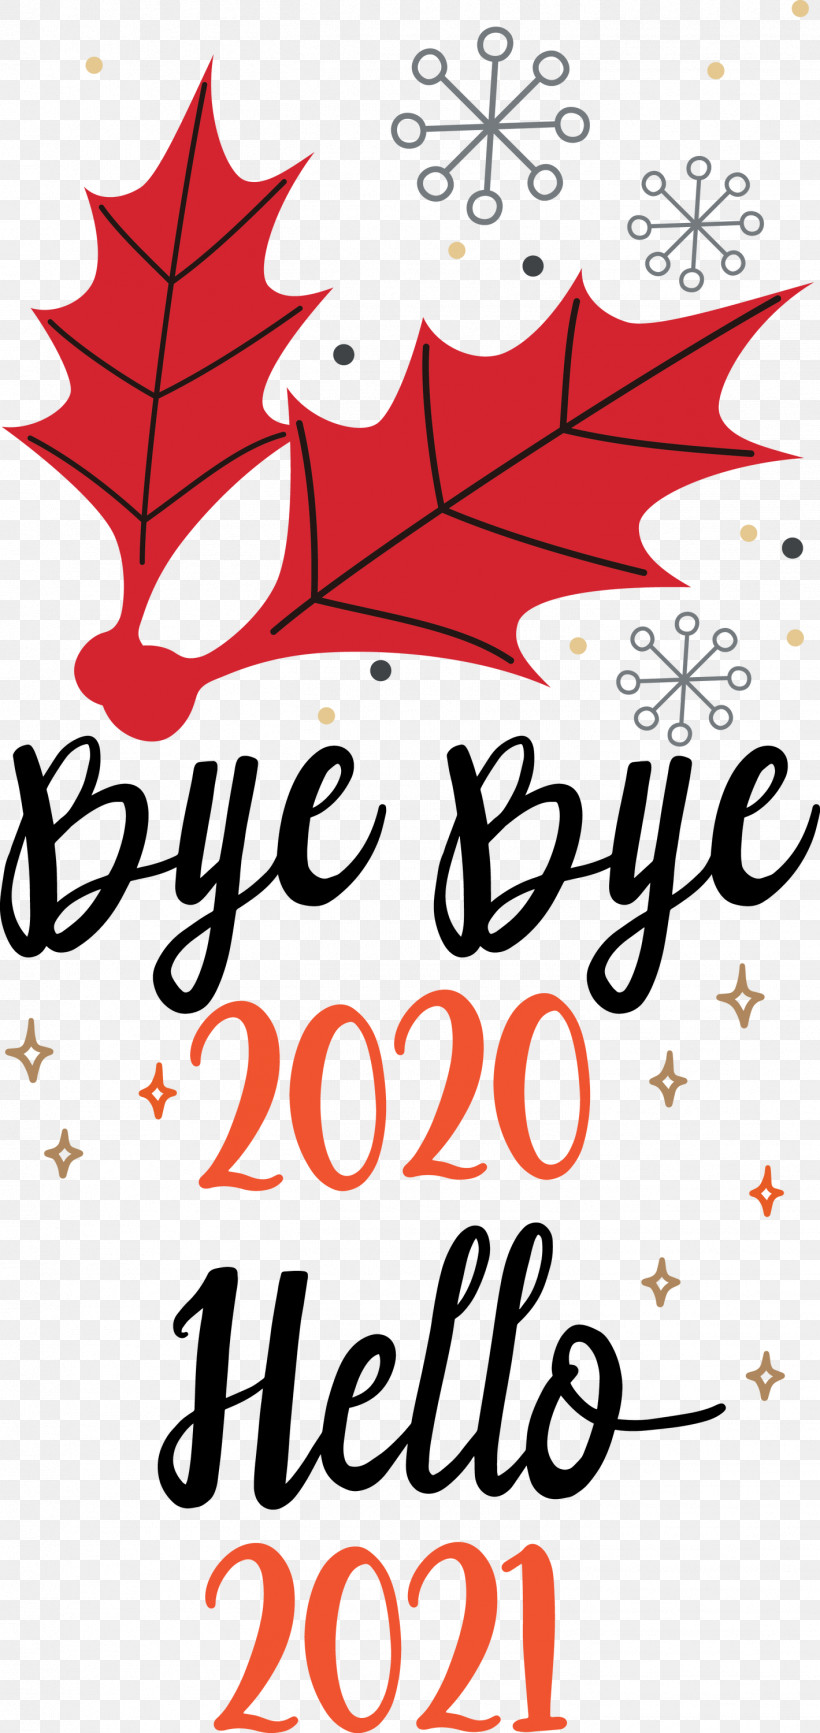 Hello 2021 Year Bye Bye 2020 Year, PNG, 1419x3000px, Hello 2021 Year, Abstract Art, Animation, Bye Bye 2020 Year, Christmas Day Download Free